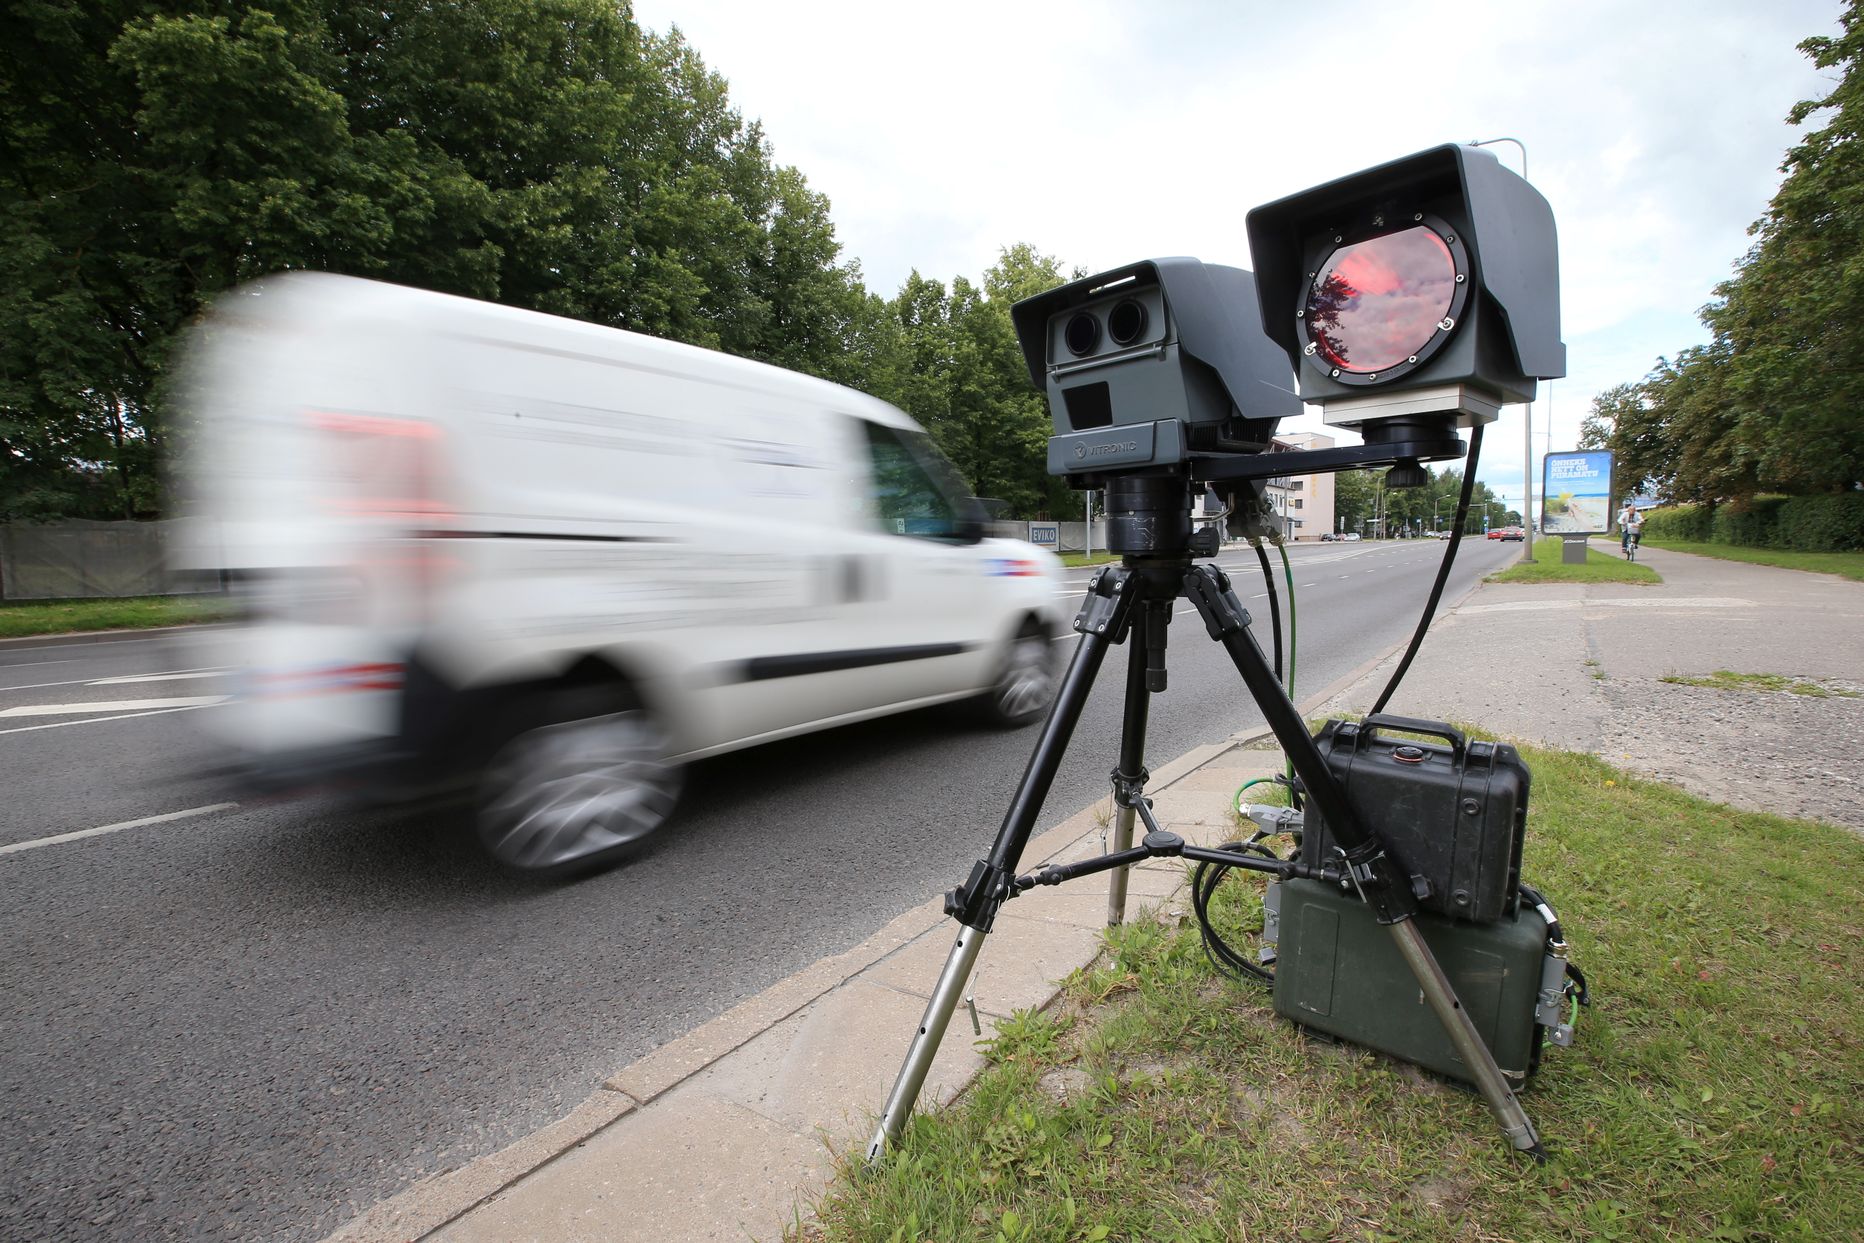 Transport Administration launches pilot to measure average vehicle speeds.